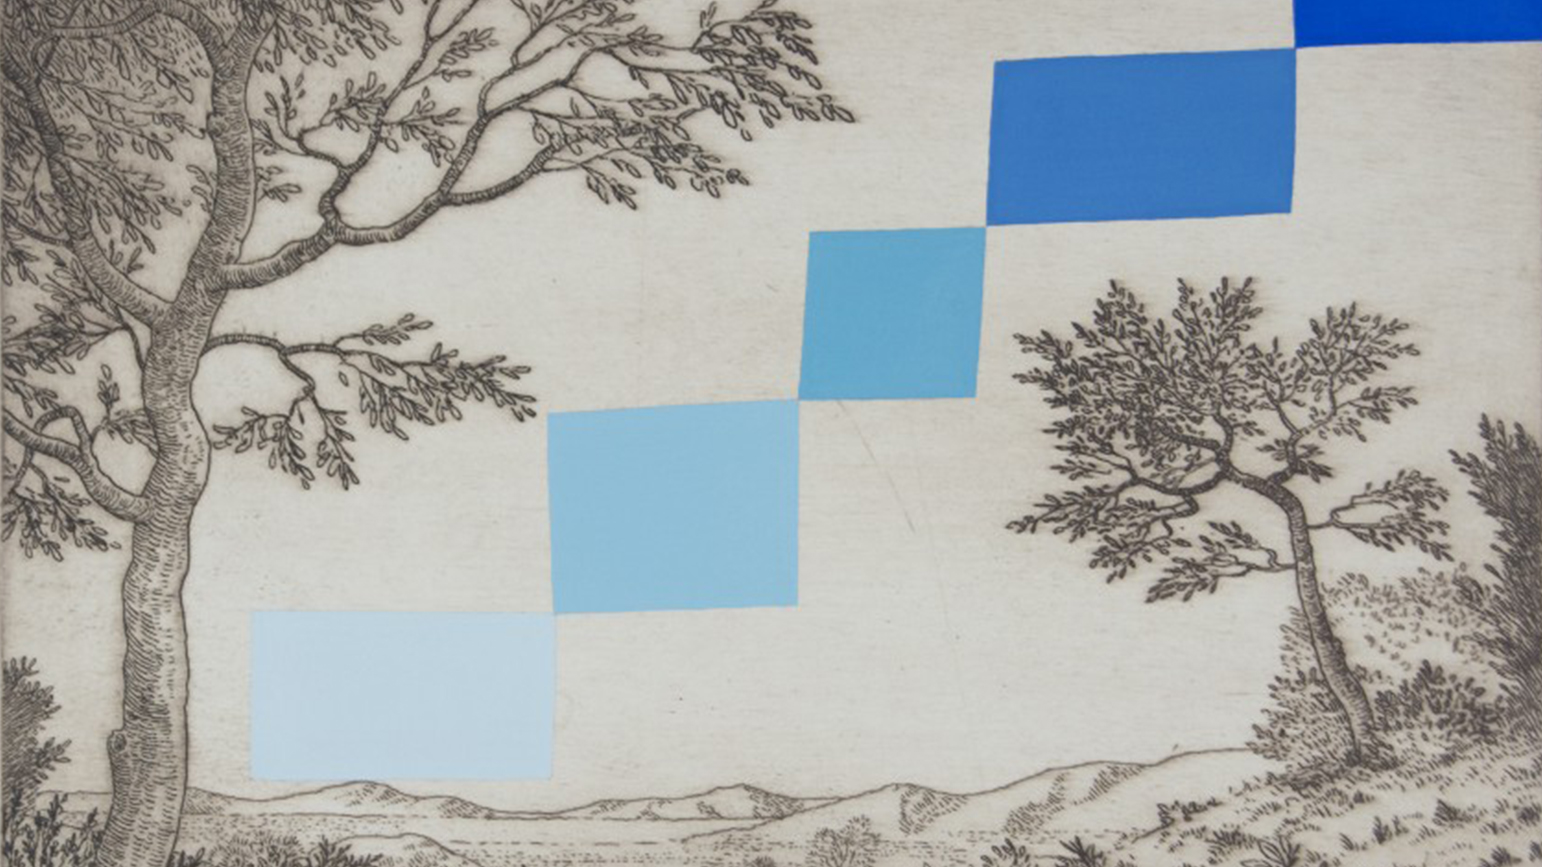 Black-and-white print of a classical landscape with rectangles of varying shades of blue painted over the image in steps